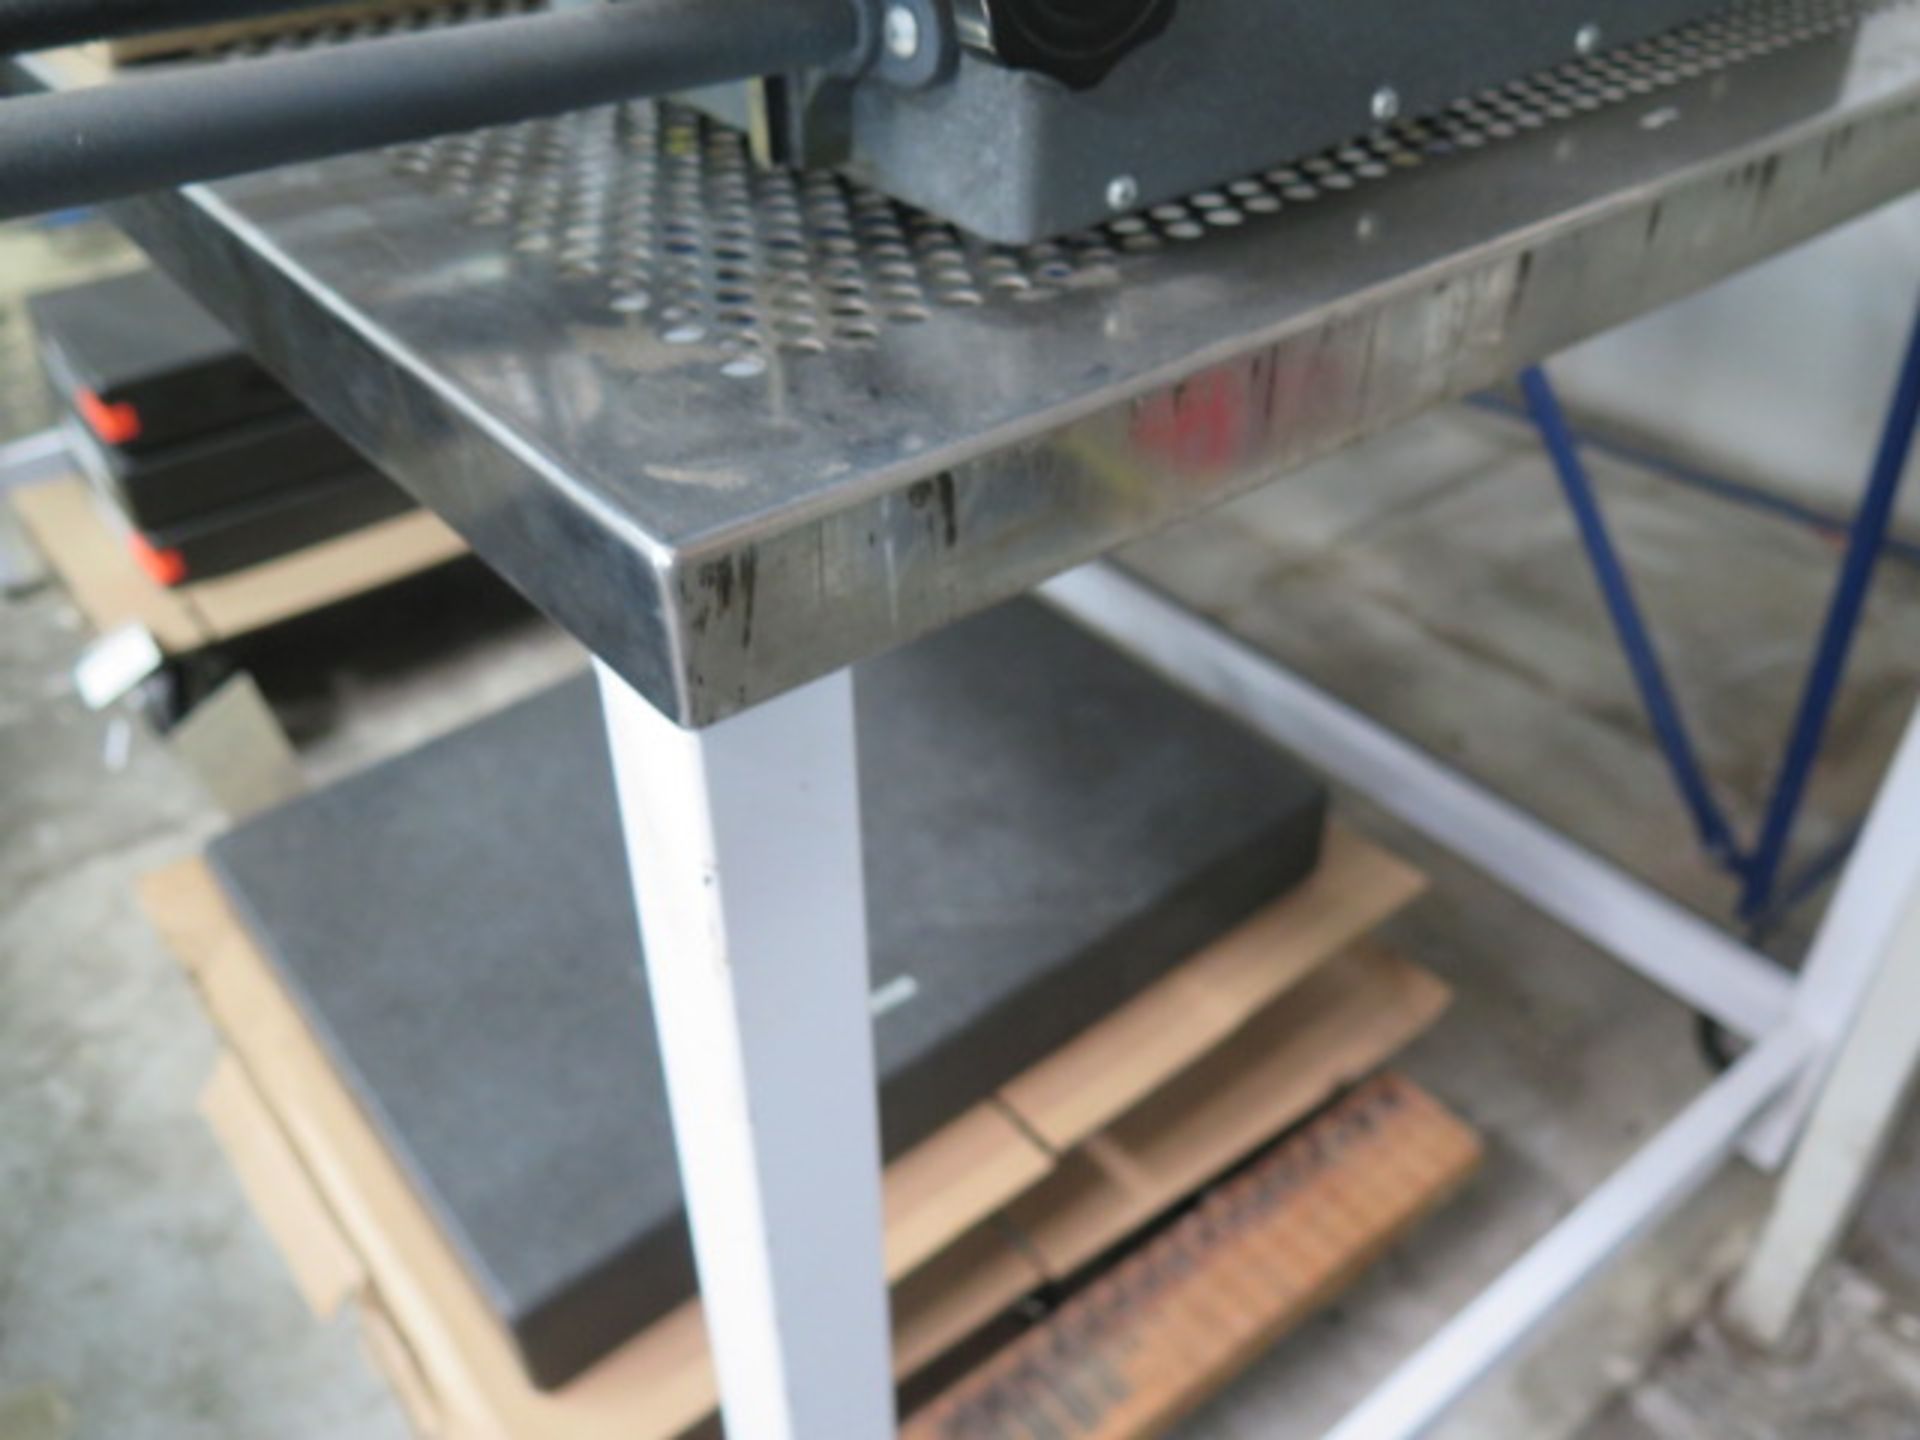 Stainless Steel Top Work Bench (SOLD AS-IS - NO WARRANTY) - Image 2 of 3